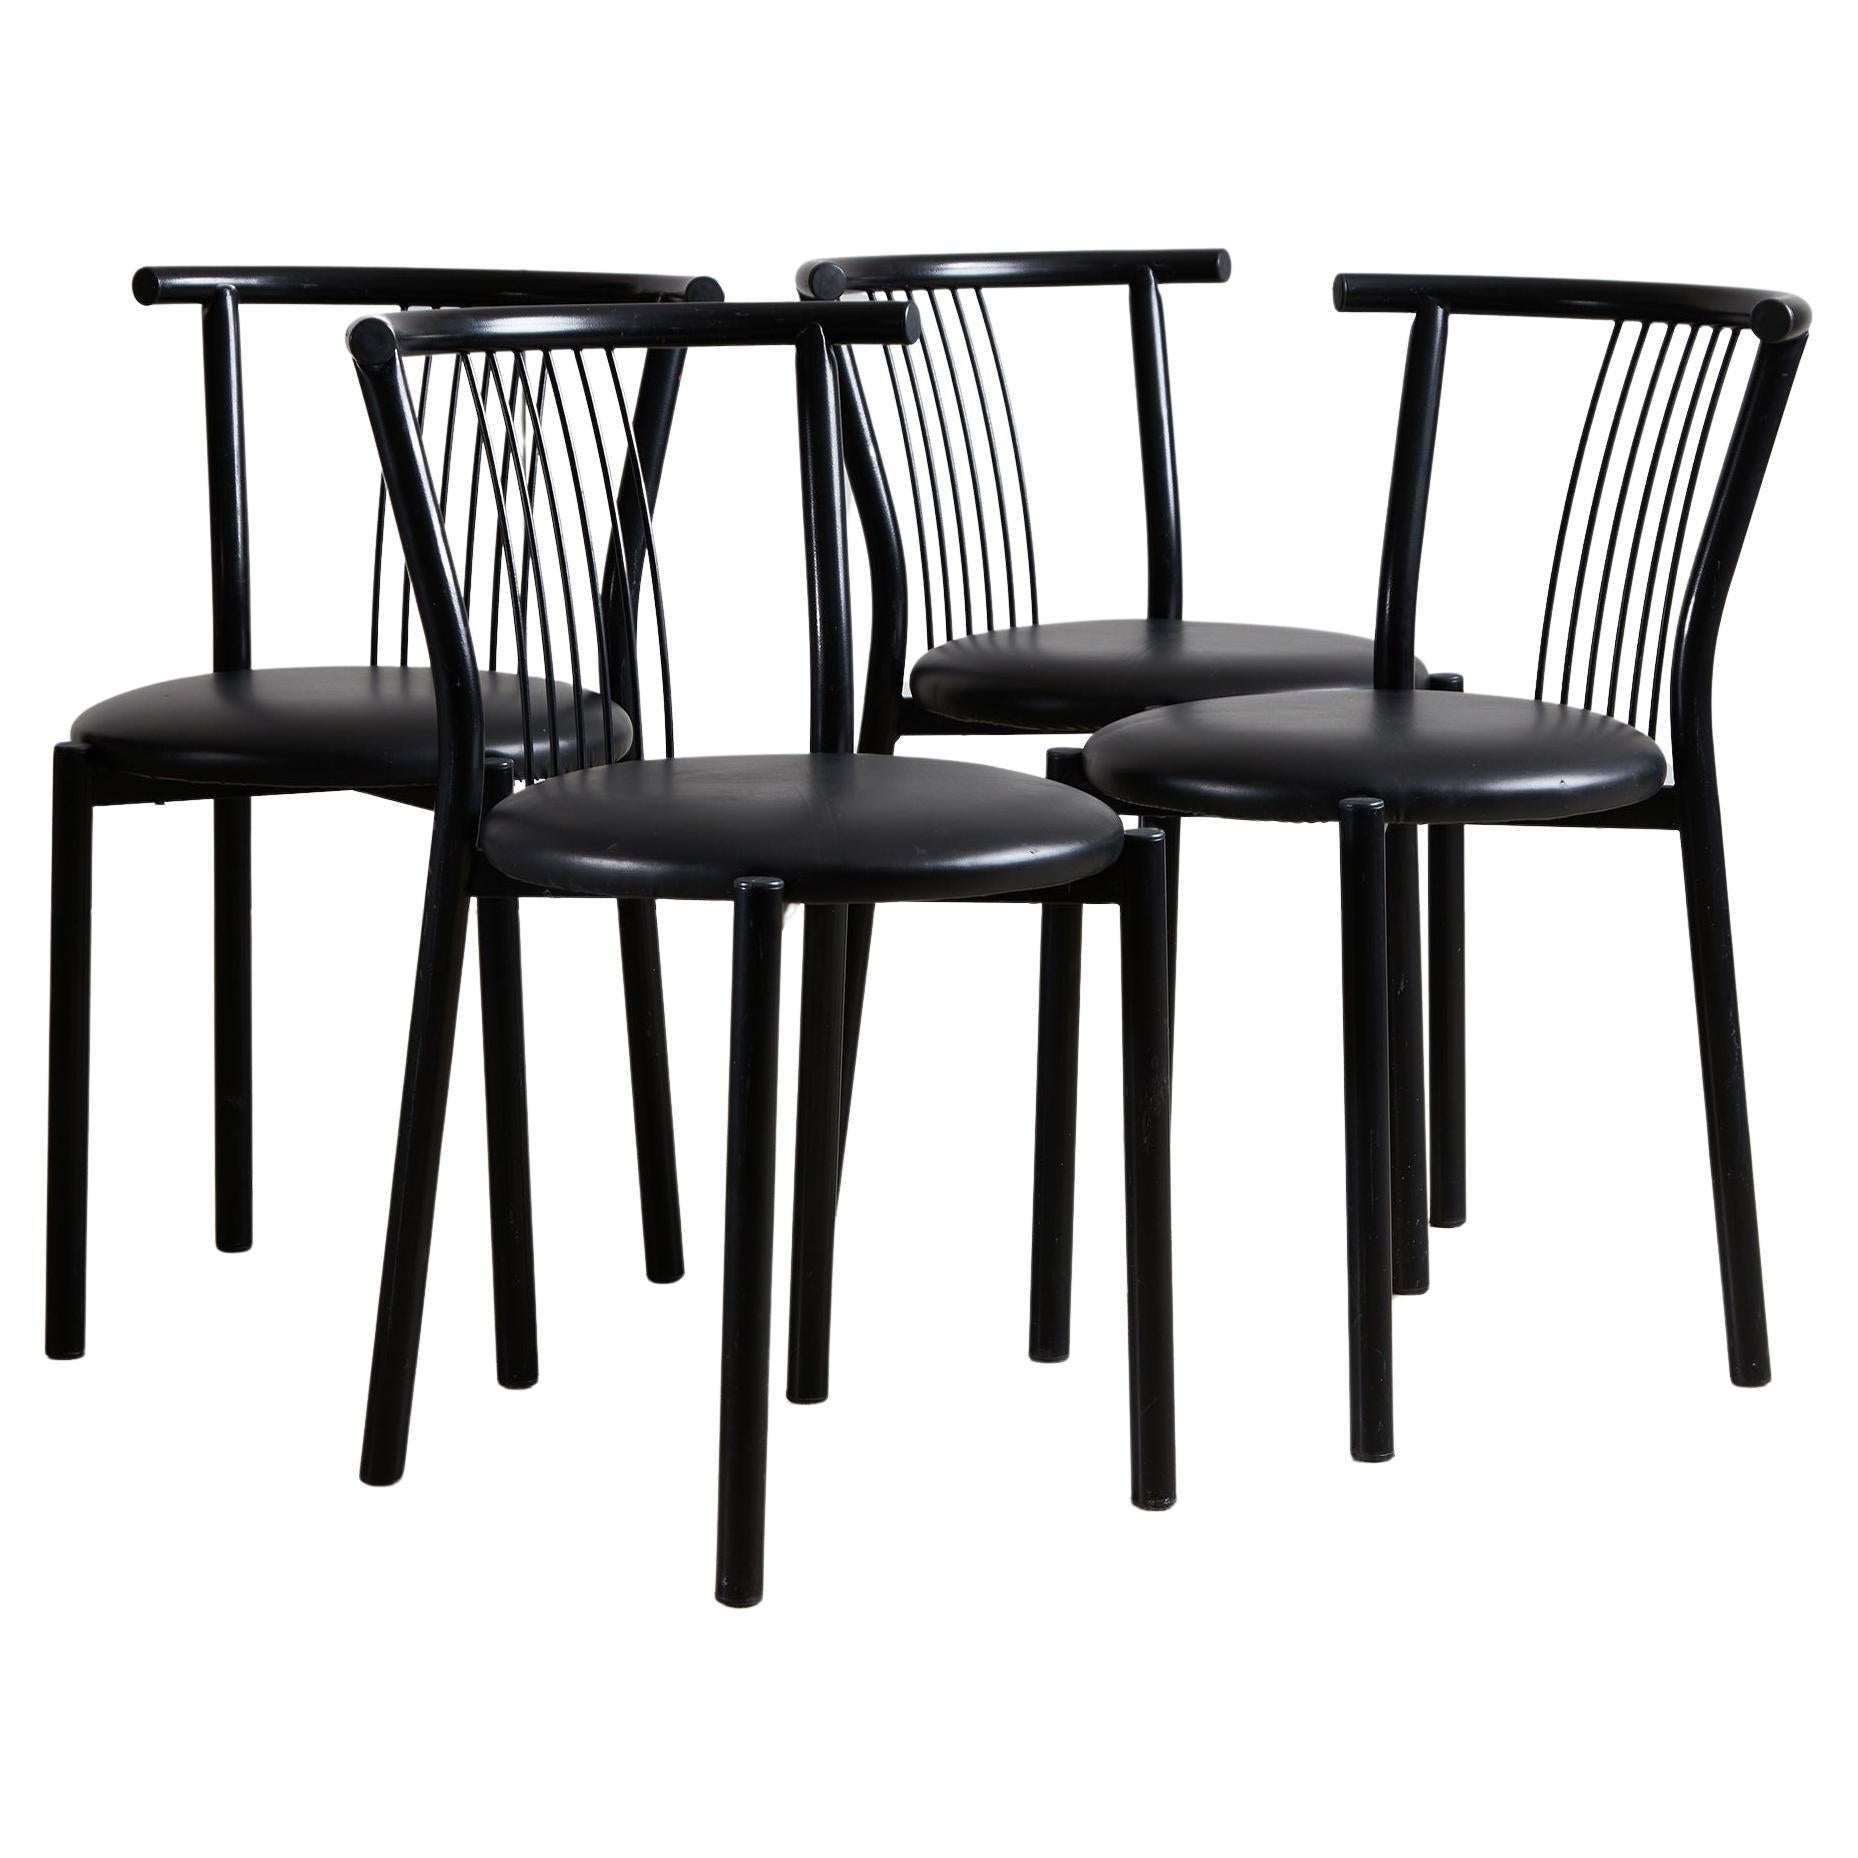 Black leather and steel dining chairs - set of 4